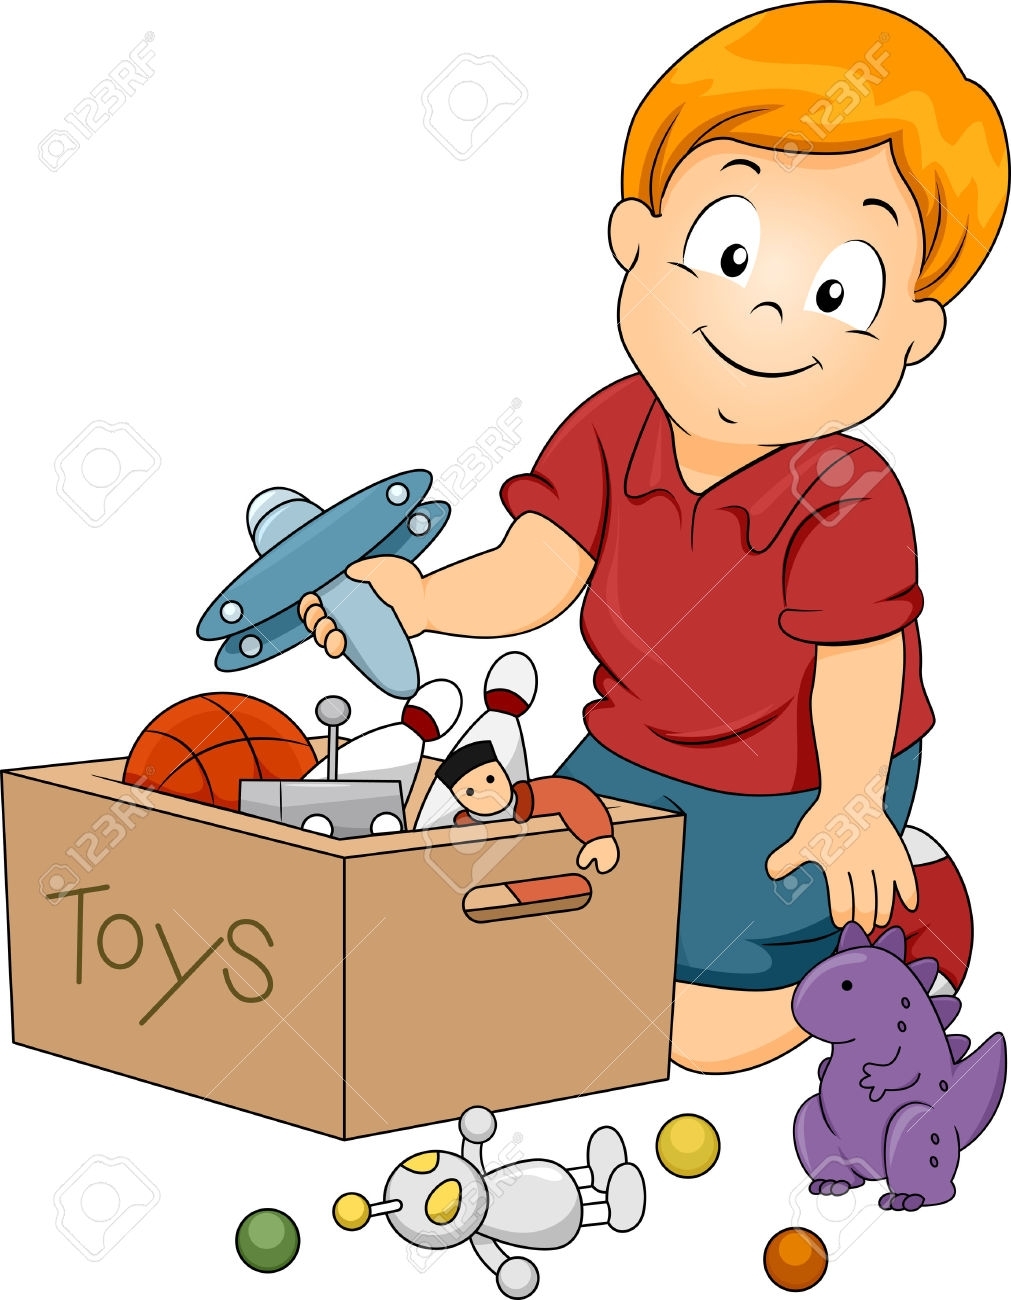 Clean up clipart Best of Kids Cleaning Up Toys Clipart Free